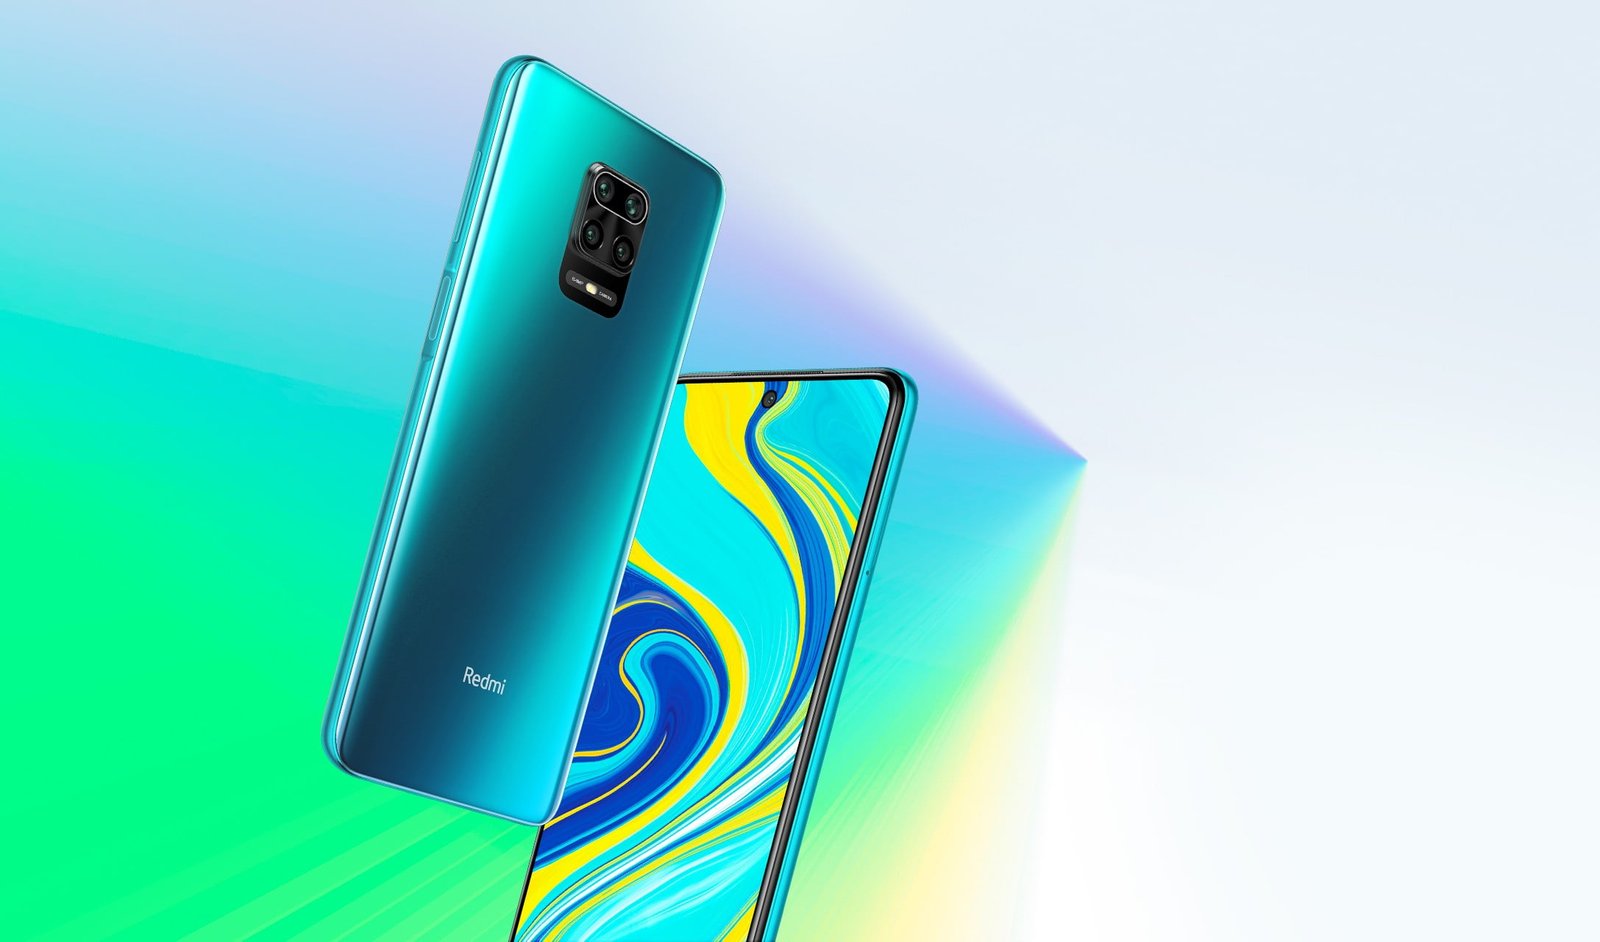 Redmi Note 9 Series: Which Should You Buy